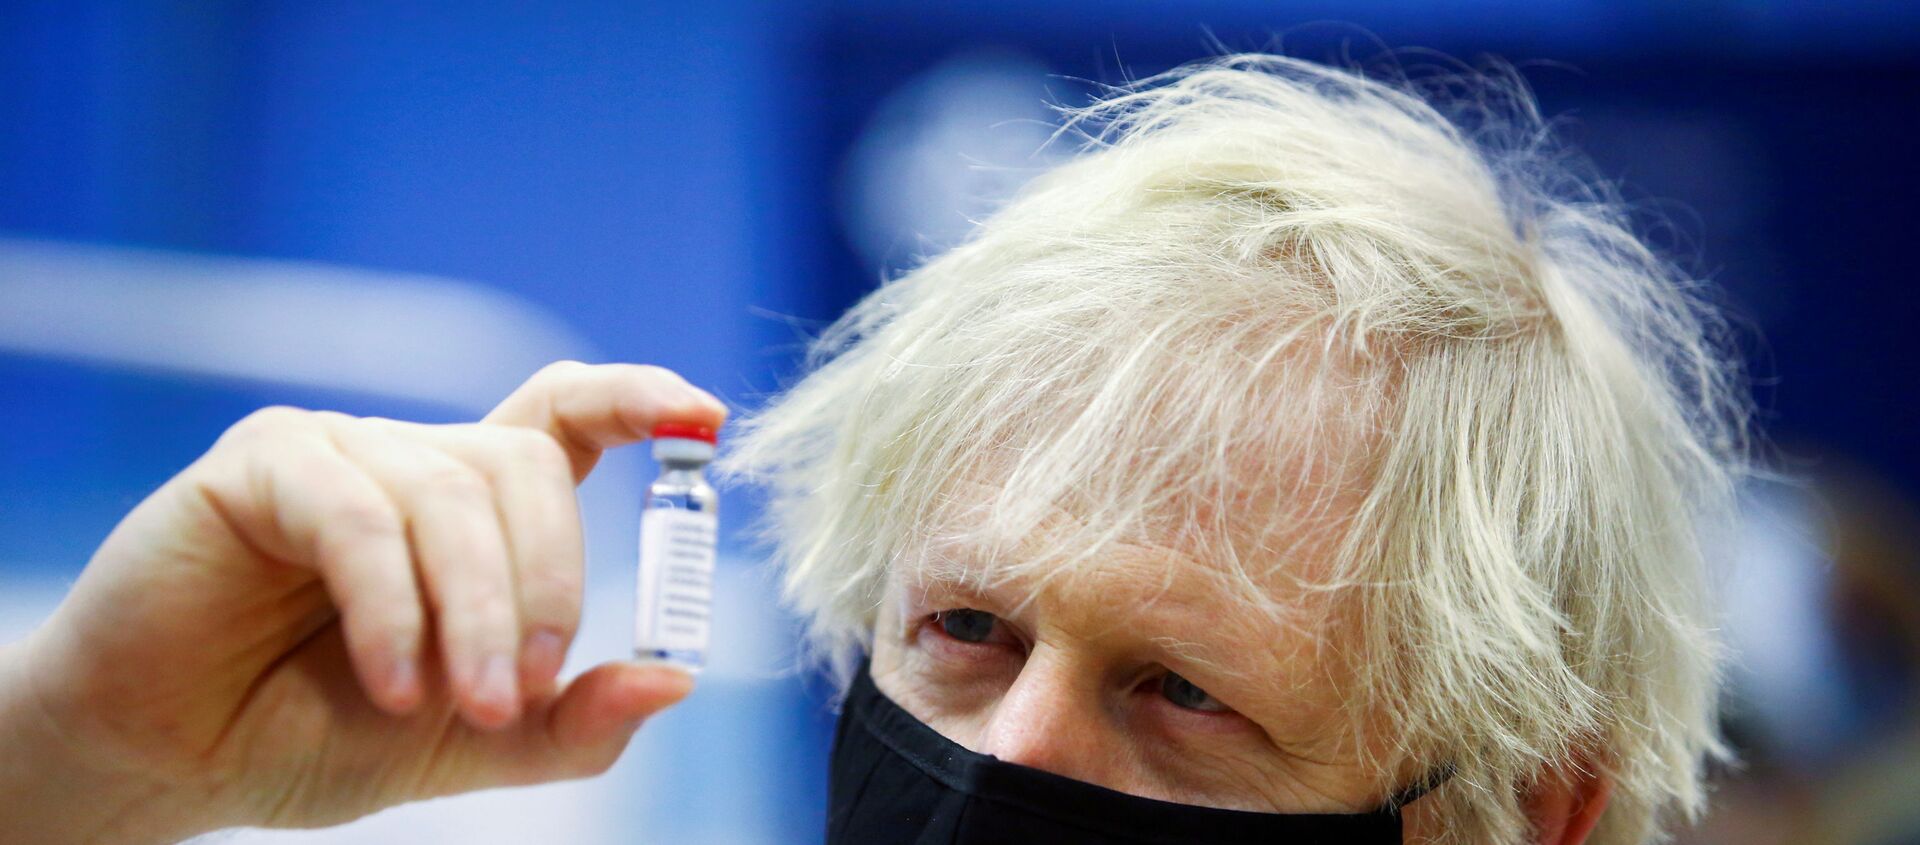 FILE PHOTO: Britain's Prime Minister Boris Johnson holds a vial of an Oxford-AstraZeneca COVID-19 vaccine, during his visit at a vaccination centre at Cwmbran Stadium in Cwmbran, south Wales, Britain February 17, 2021. Geoff Caddick/Pool via REUTERS/File Photo - Sputnik International, 1920, 23.02.2021